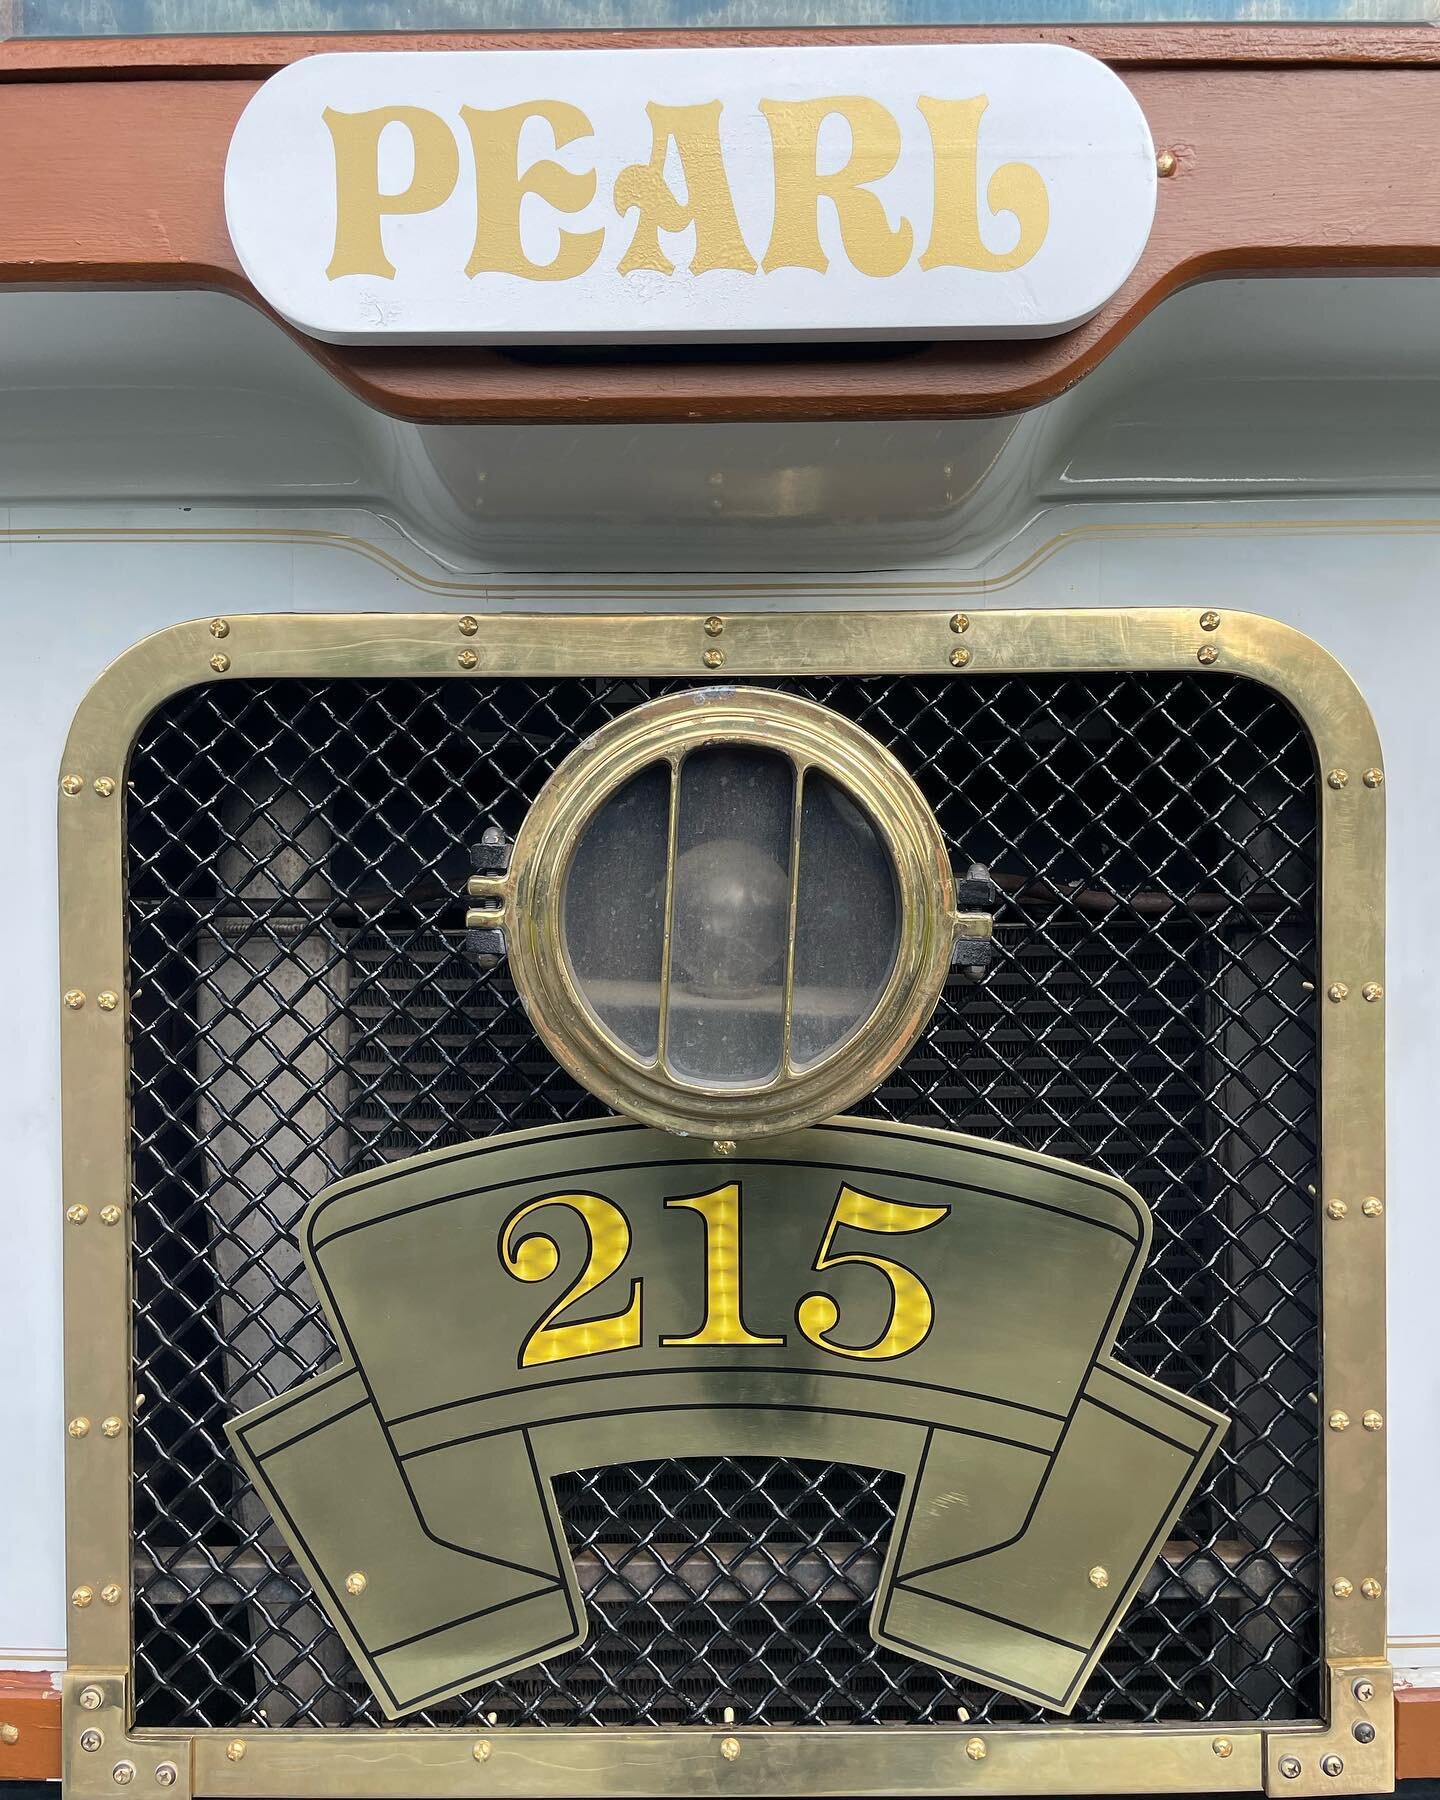 Pearl got a makeover! 🚃 
The name plate has been added, the original brass has been restored, AND you know we had to remove the old numbers and give a shout out to 215! Photo ready 😎📸
.
. 
. 
#pabride #buckscounty #montcopa #paweddingideas #pawedd